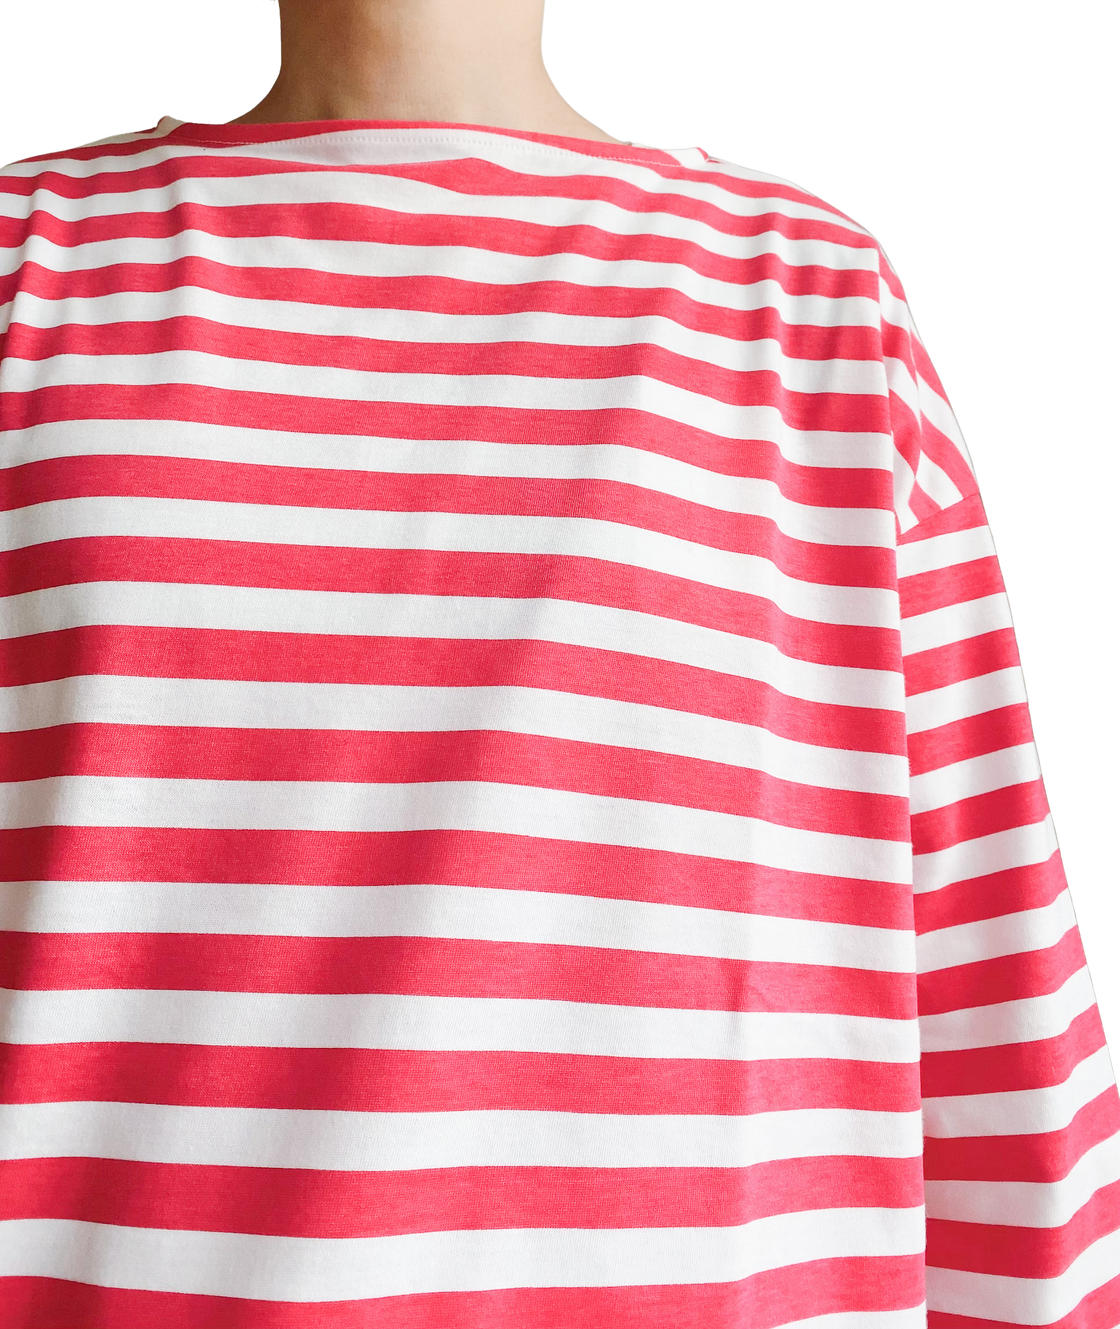 ORIGINAL PRINT BOADER WIDE PULL OVER in White-Pink